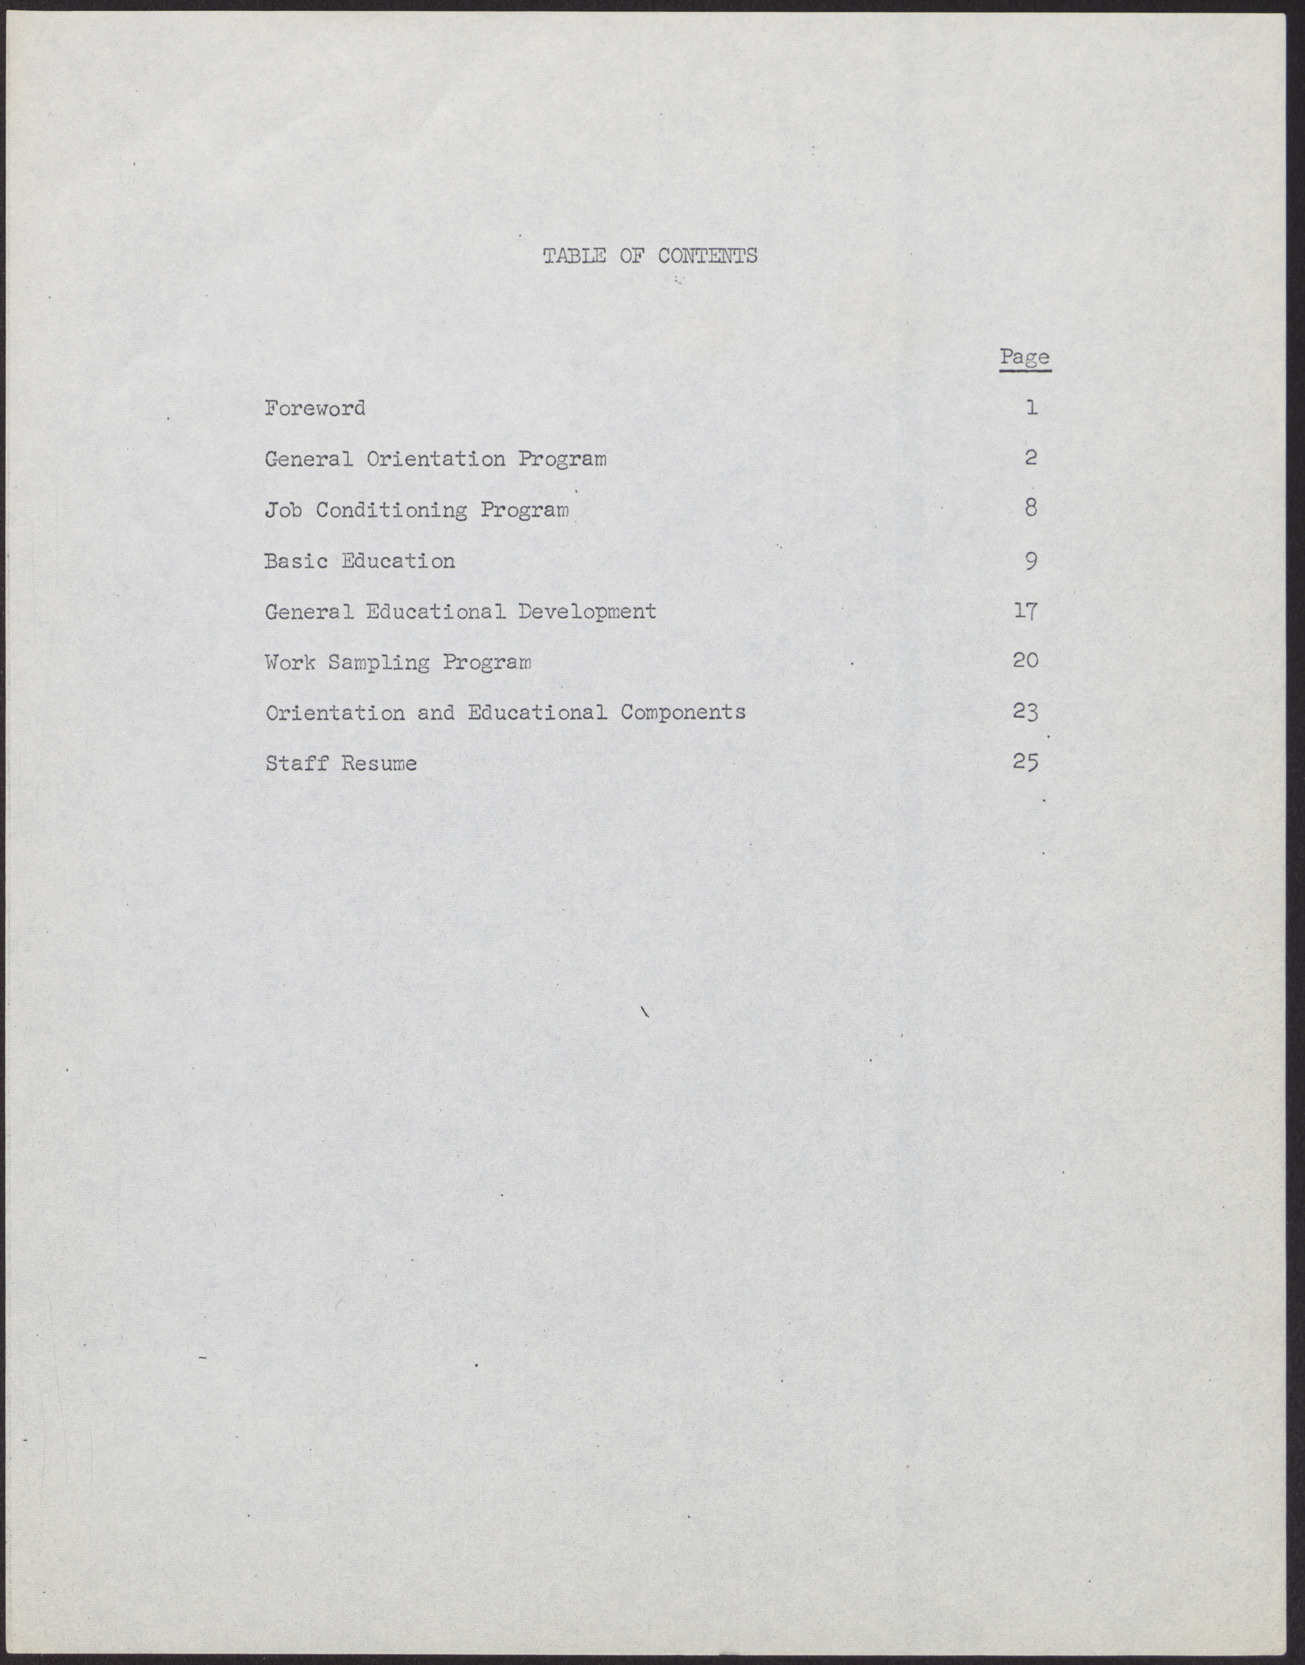 Proposal to the Clark County, Nevada Concentrated Employment Program (21 pages, missing some pages/sections listed in its table of contents), July 2, 1968, page 2